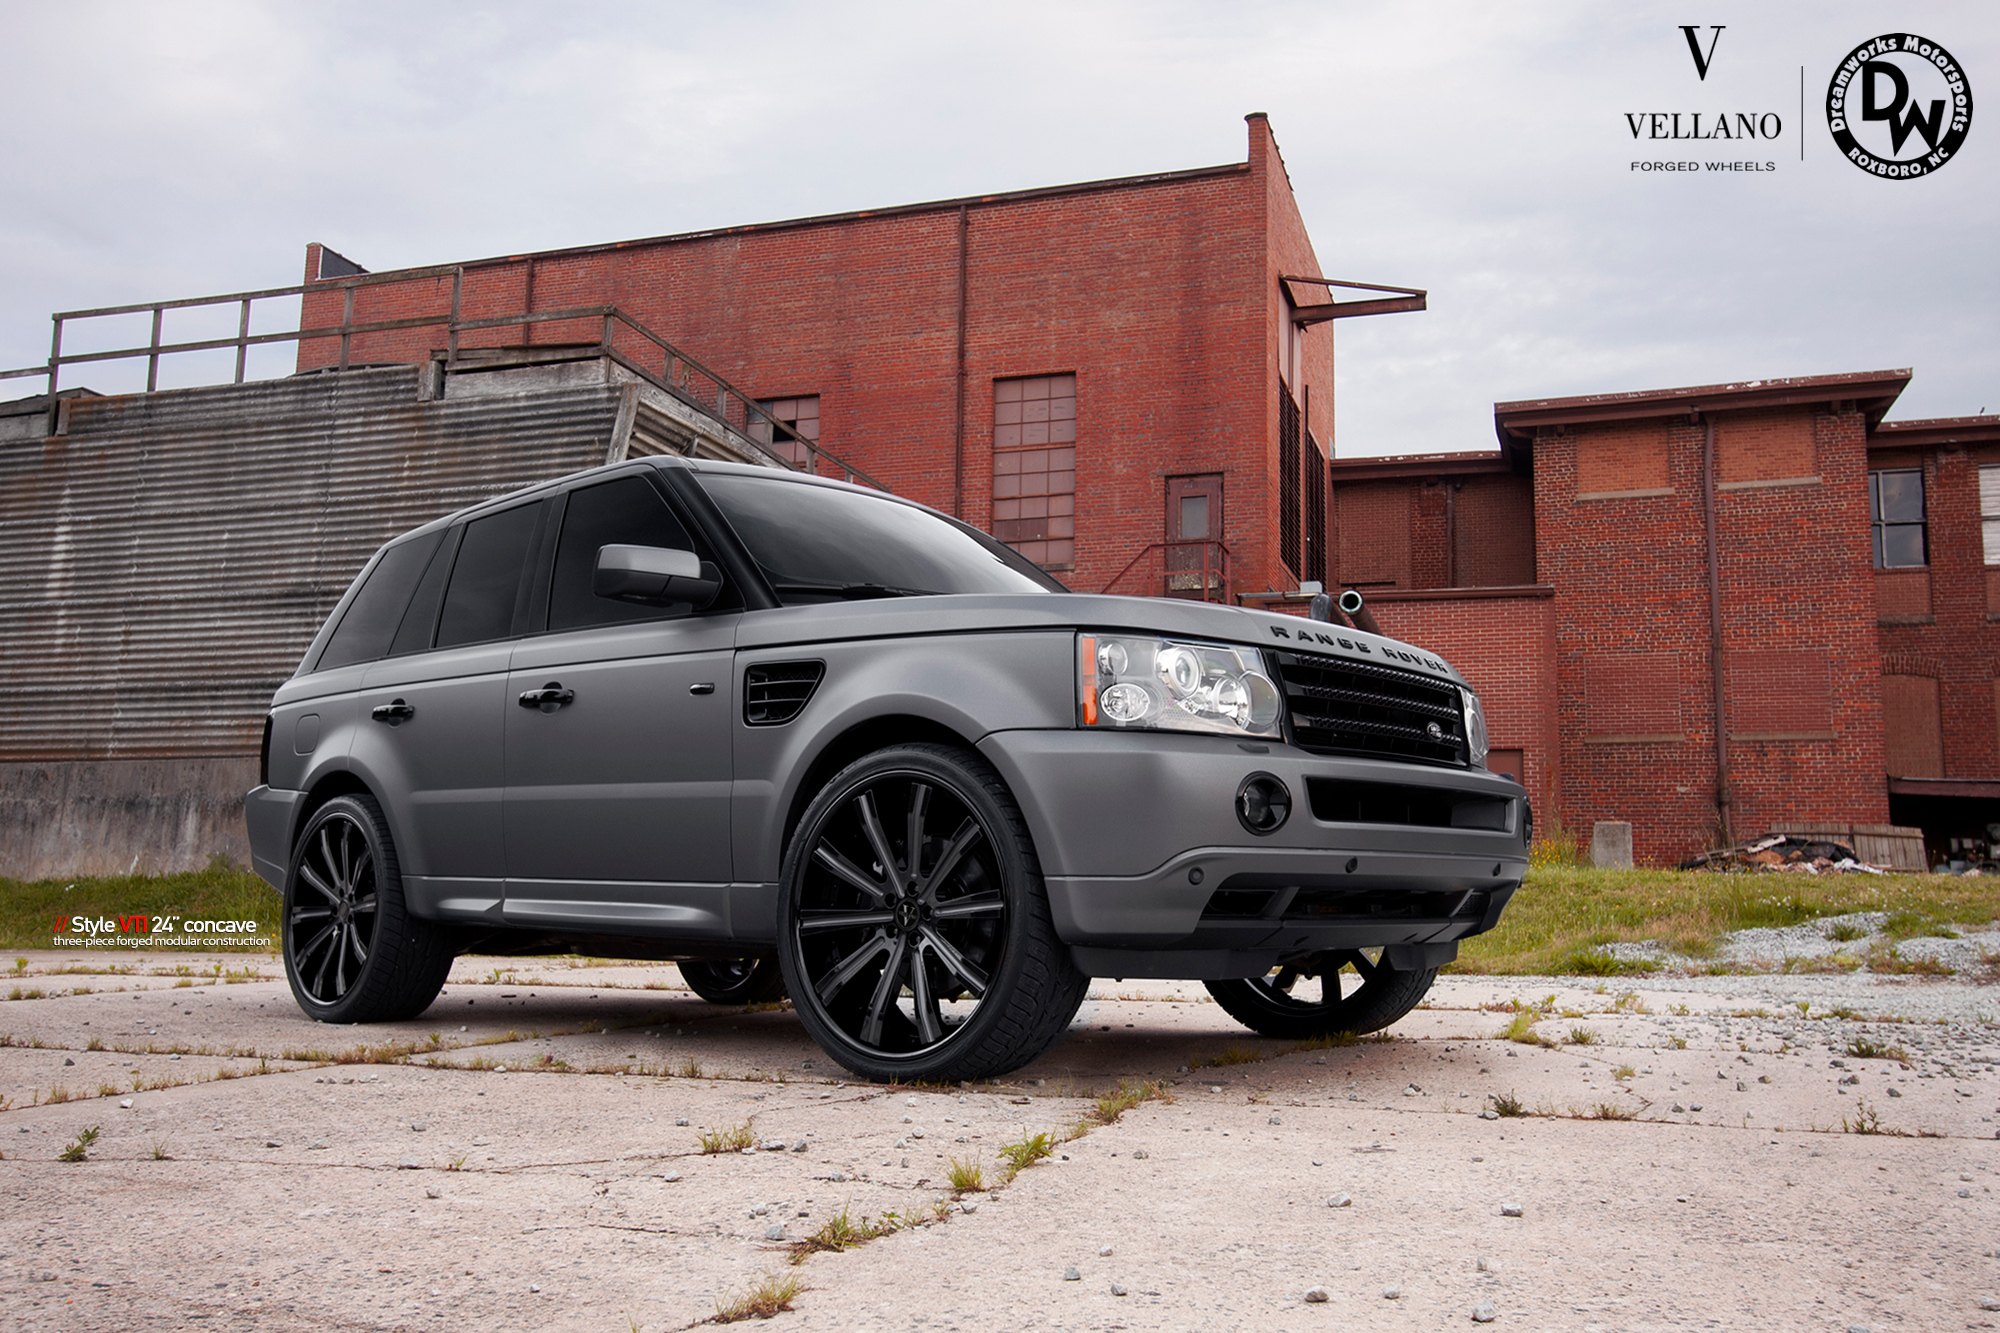 Front Bumper with Fog Lights on Gray Range Rover Sport - Photo by Vellano